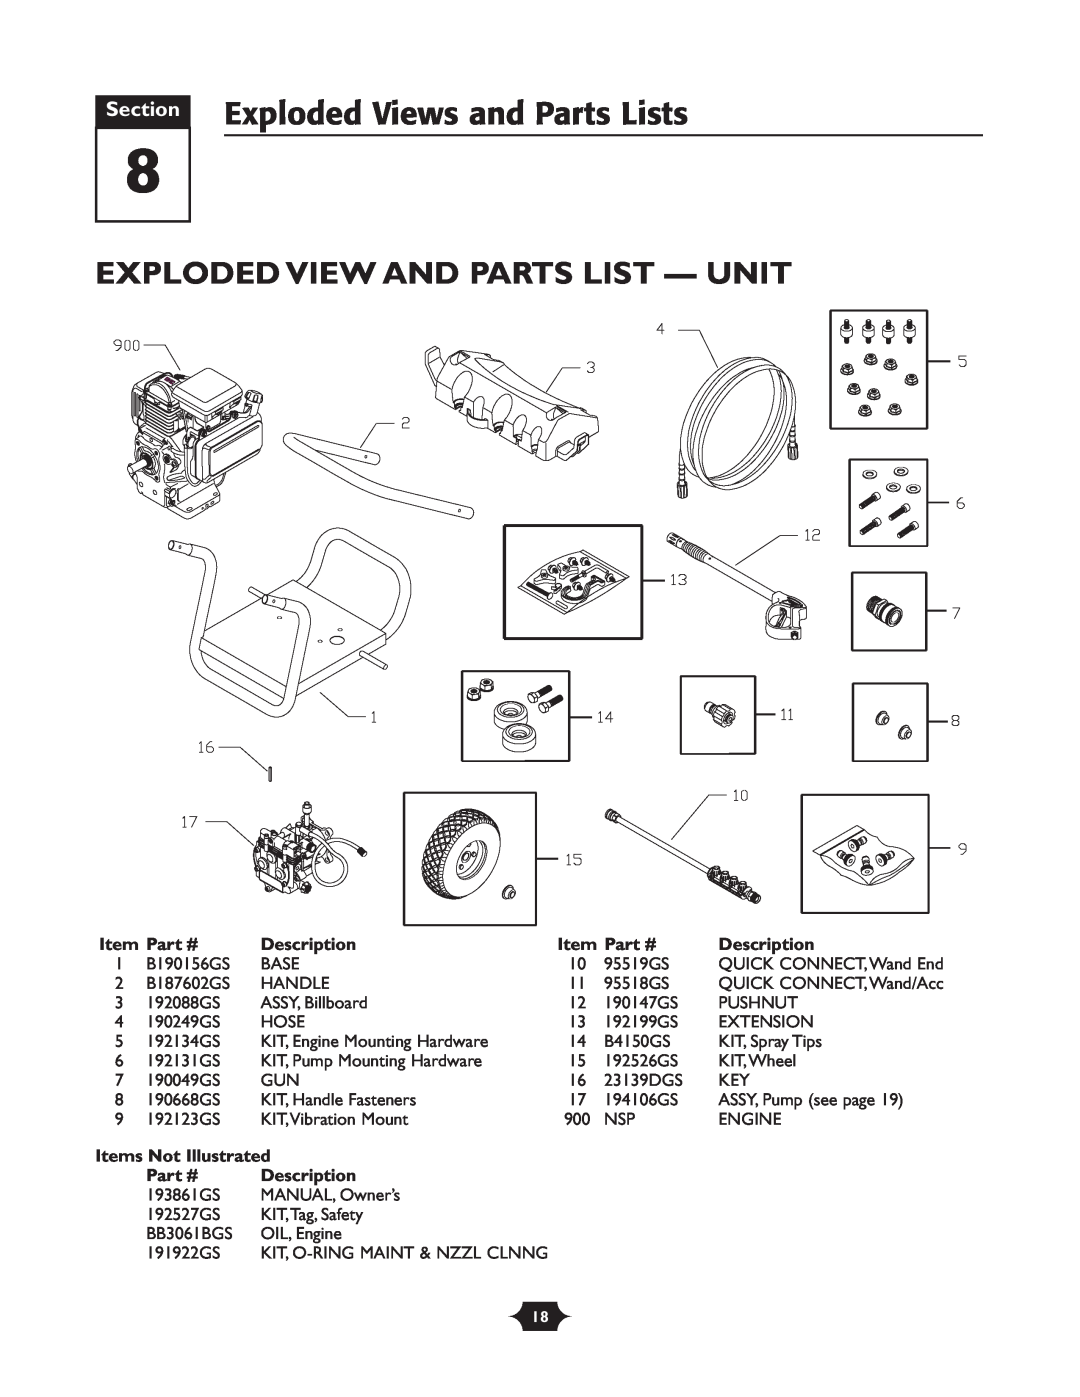 Briggs & Stratton 1903 Section Exploded Views and Parts Lists, Exploded View And Parts List — Unit, Item Part # 